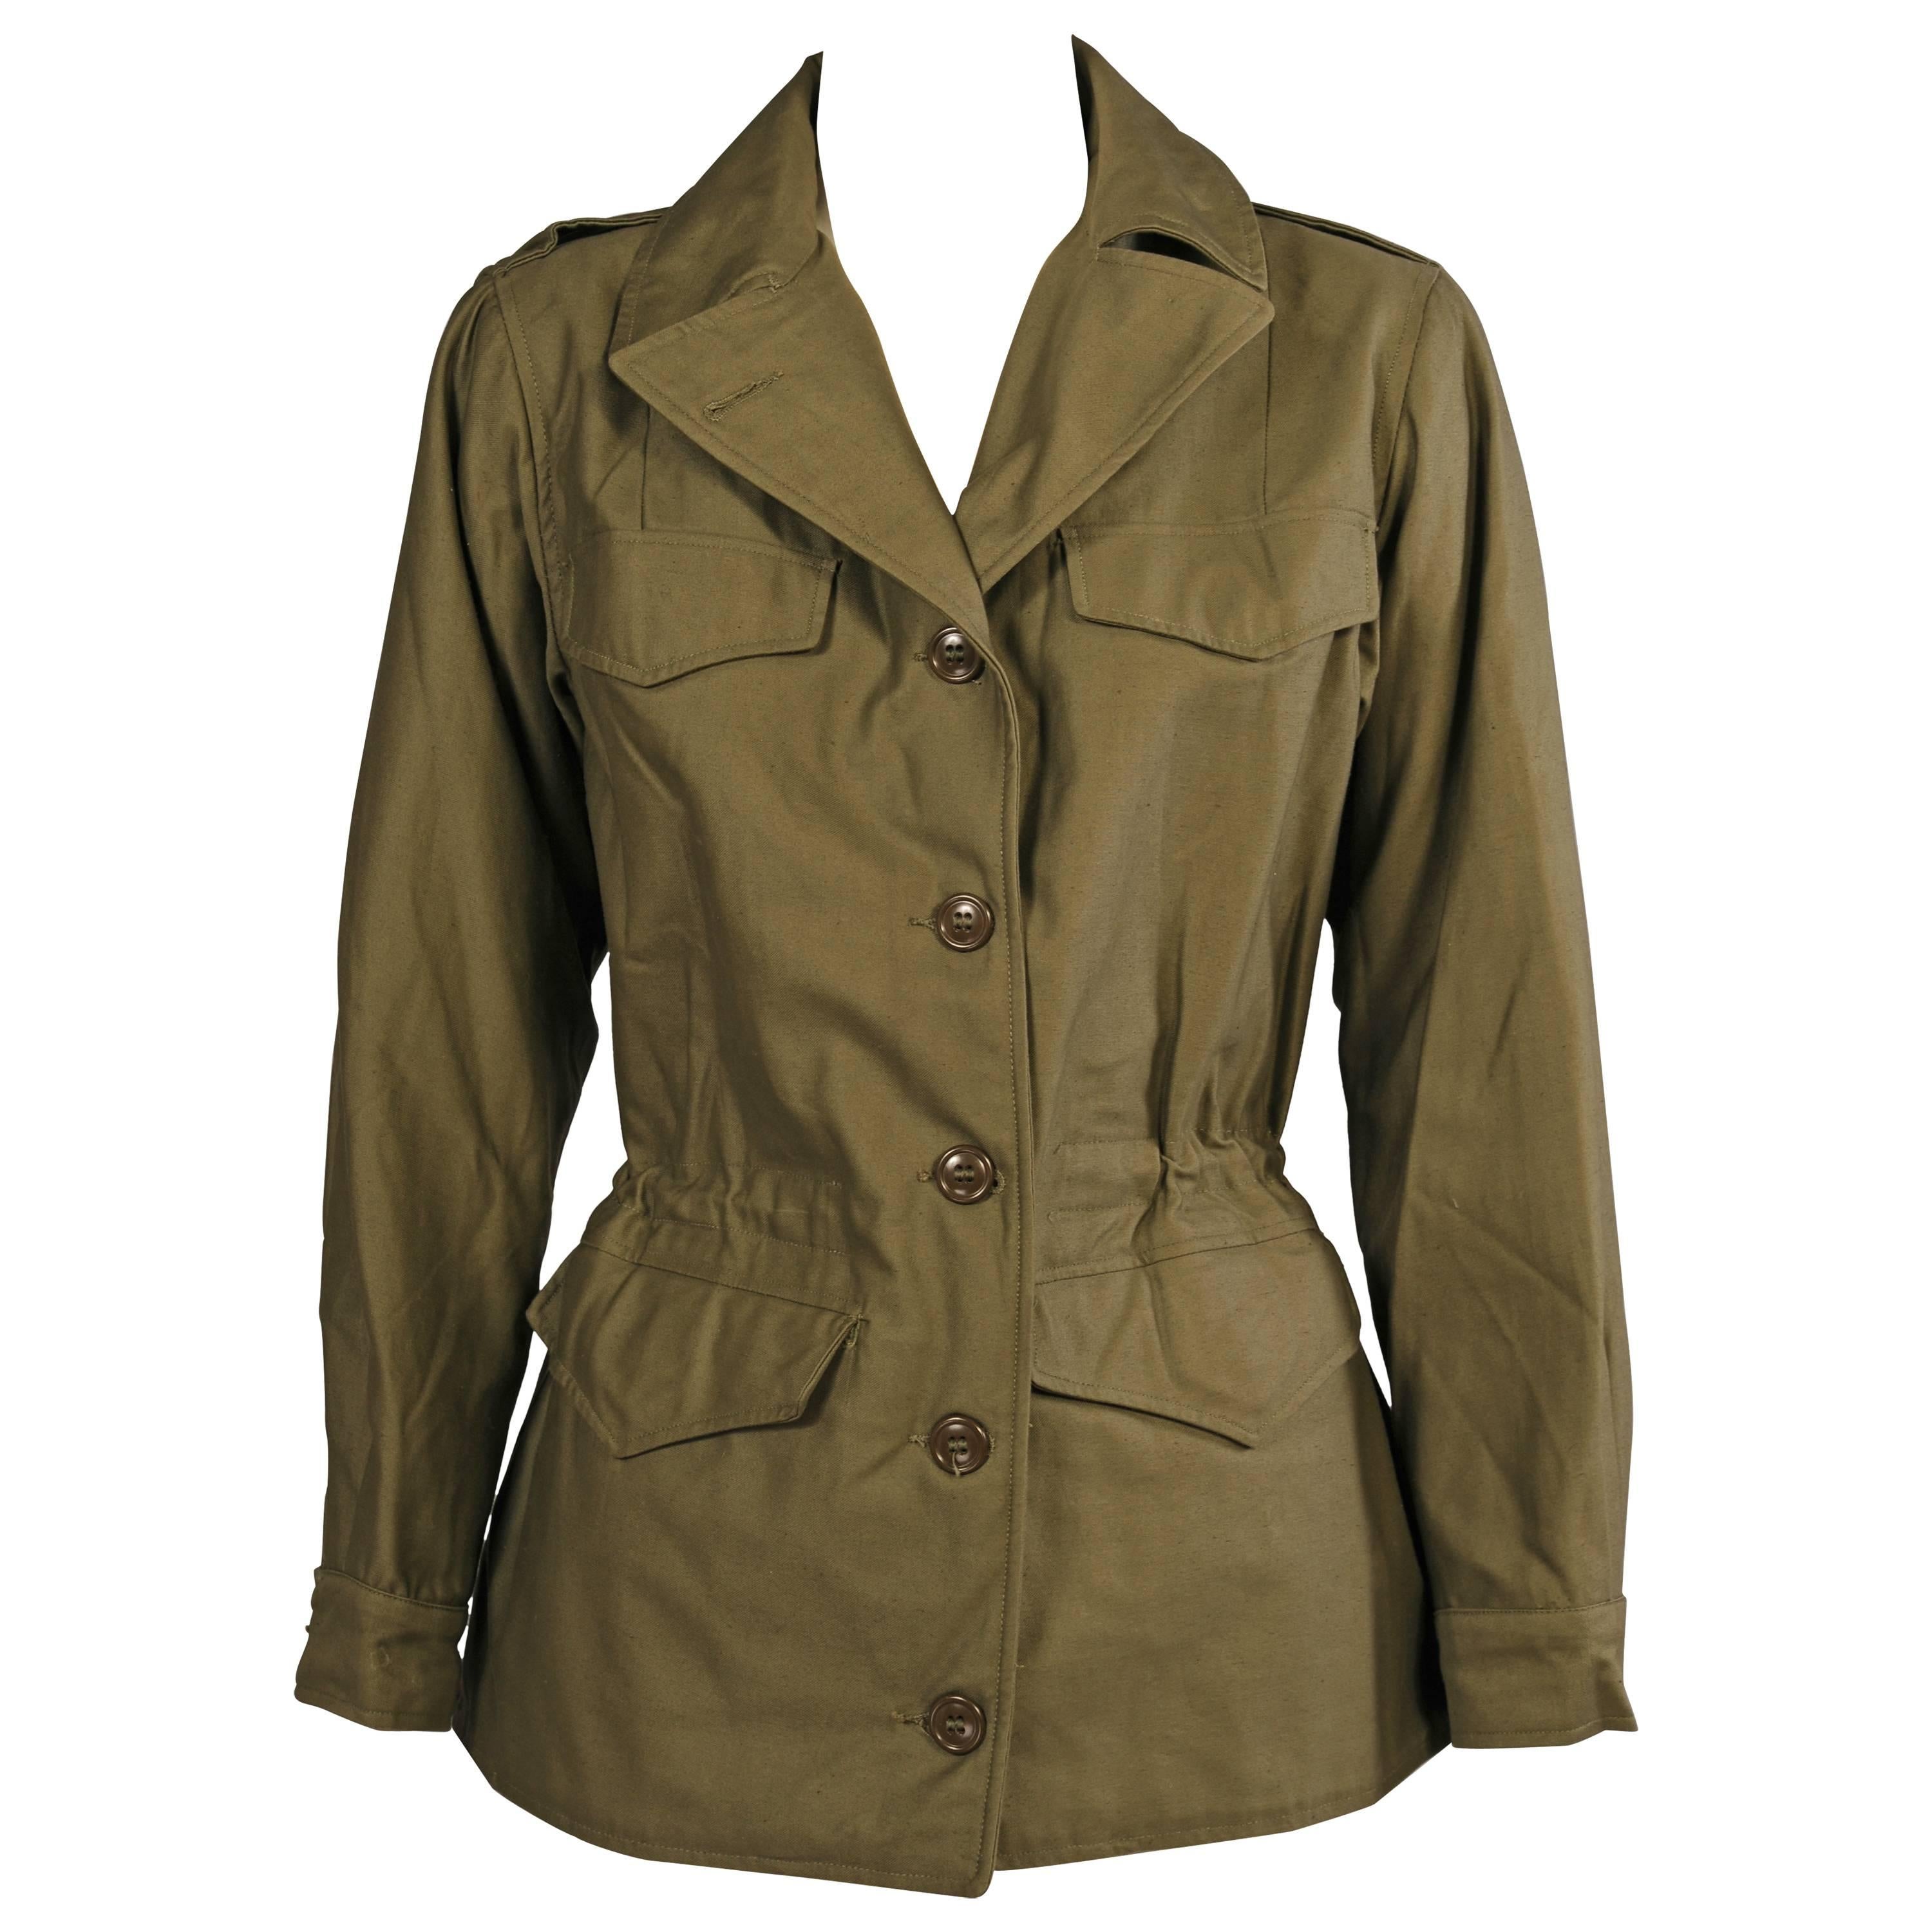 1943 Women's Field Jacket, United States Army, Never Worn